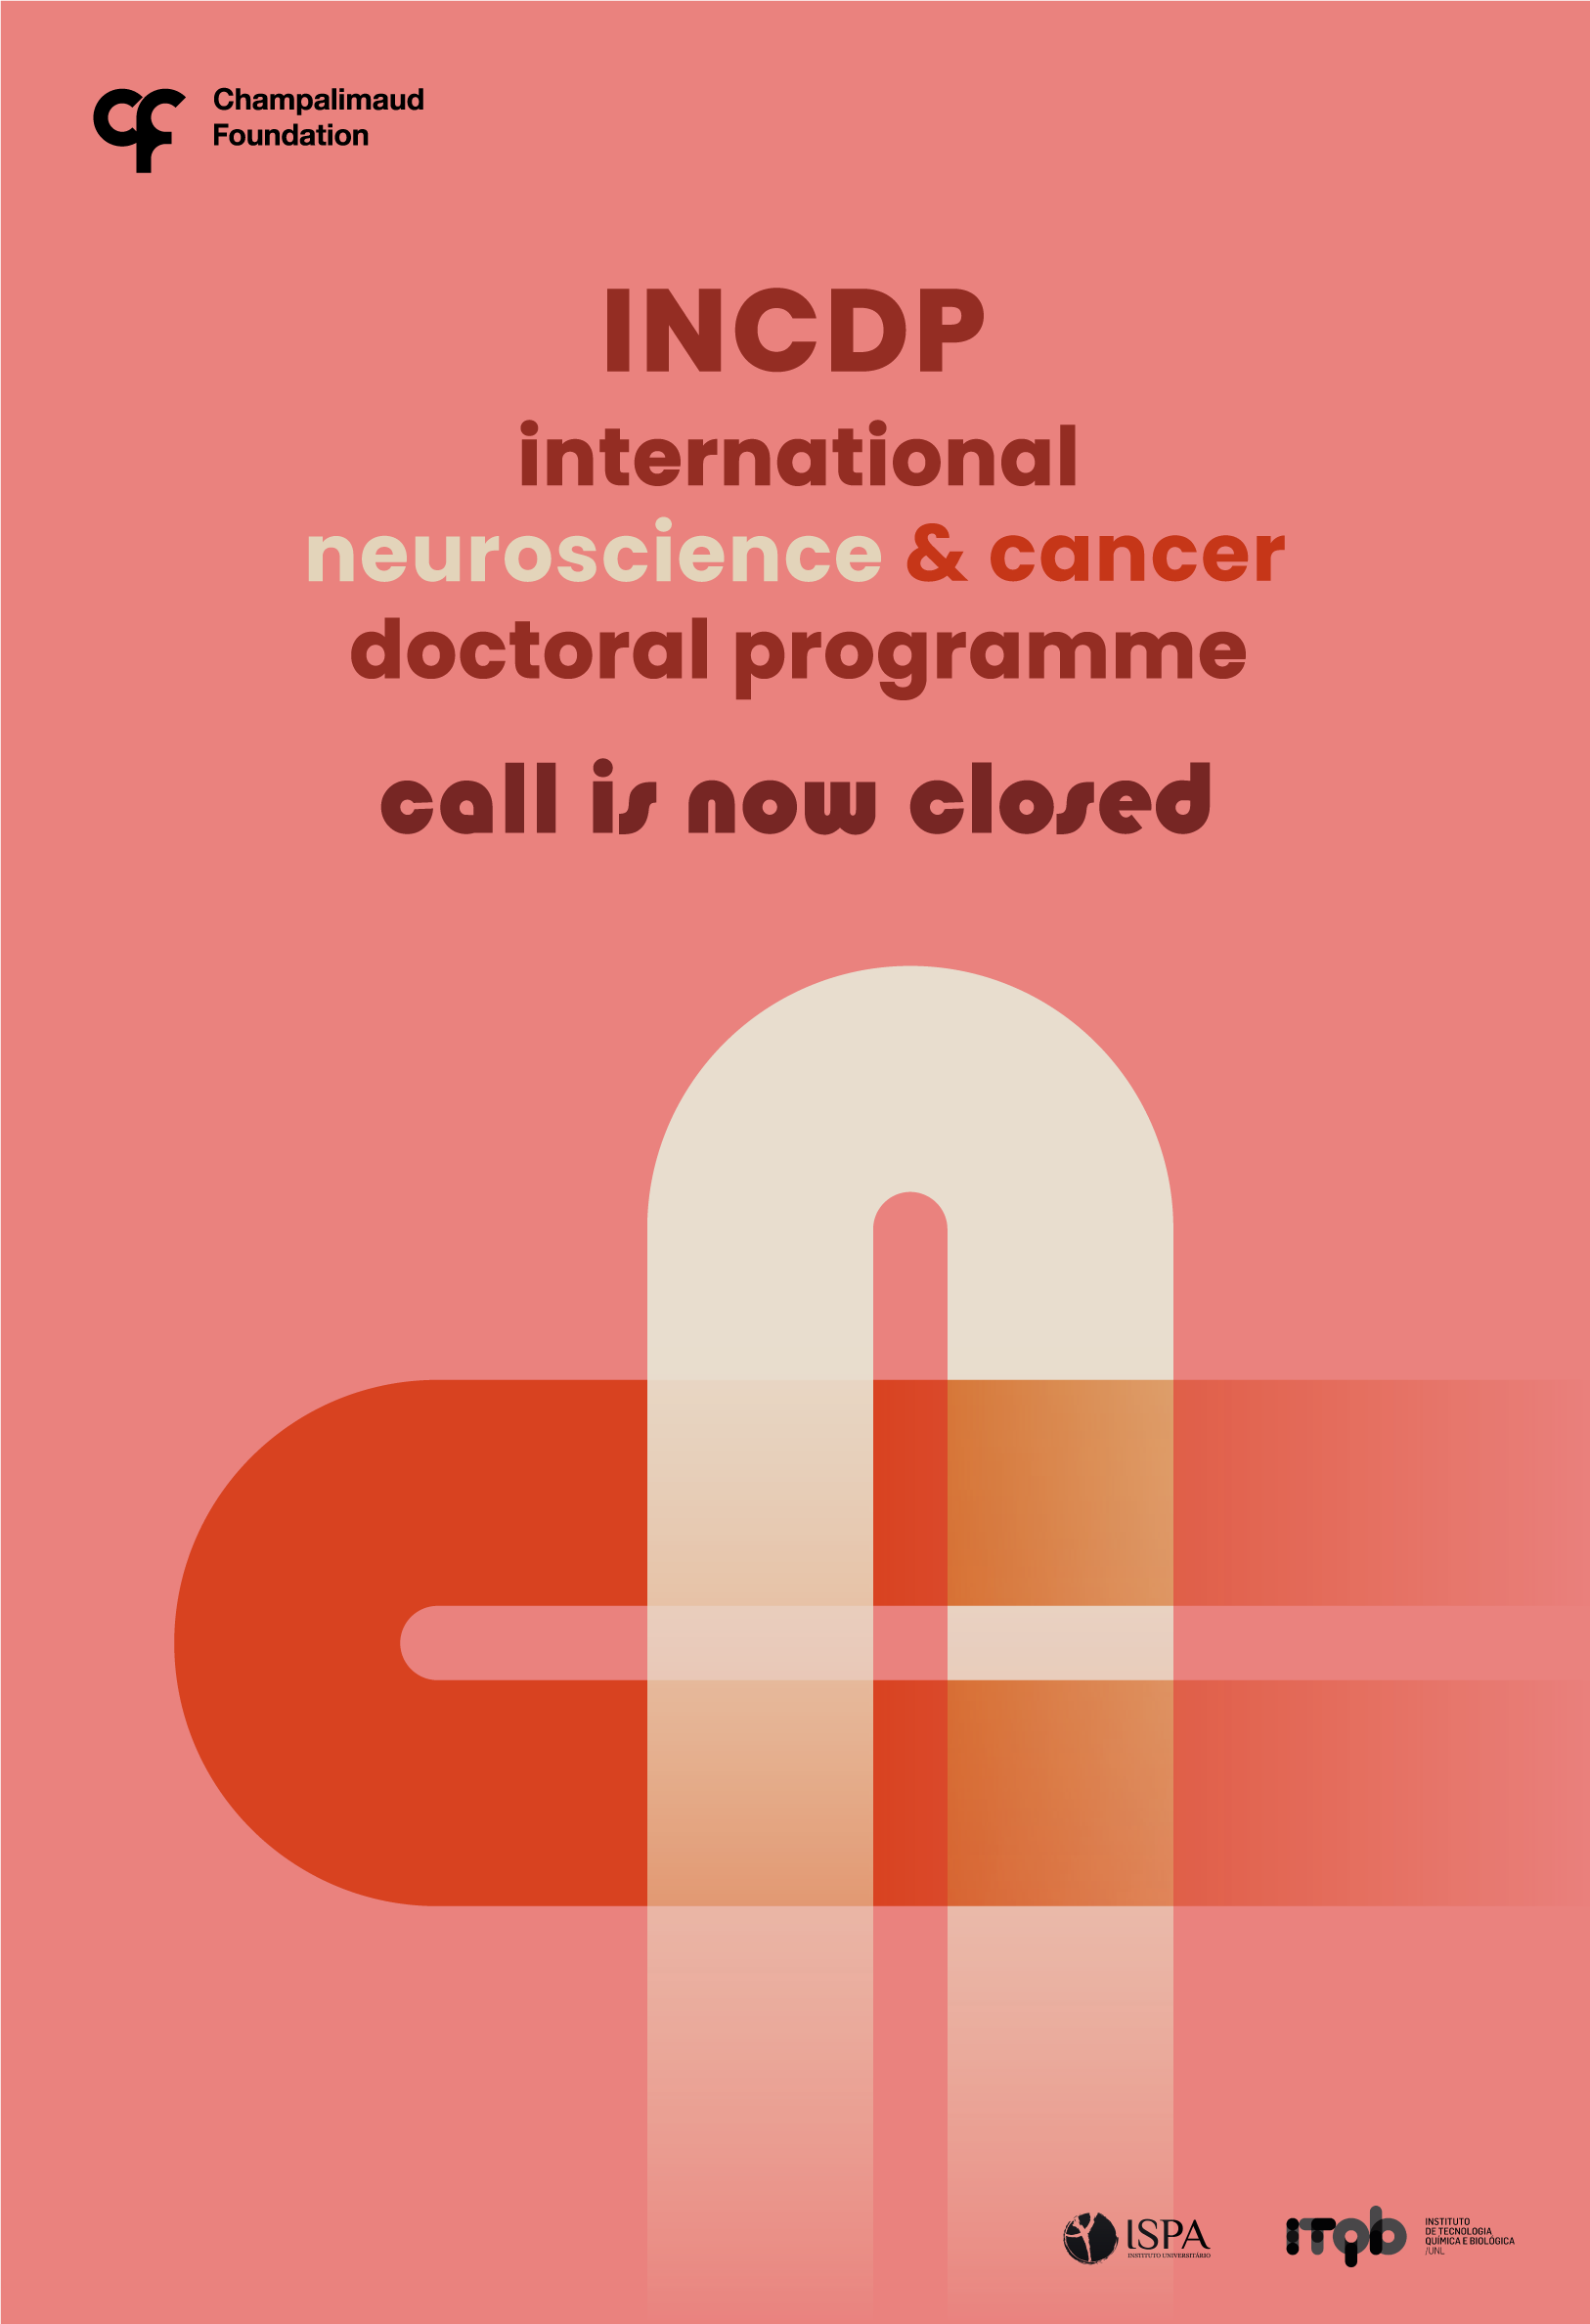 International Neuroscience and Cancer Doctoral Programme (INCDP)